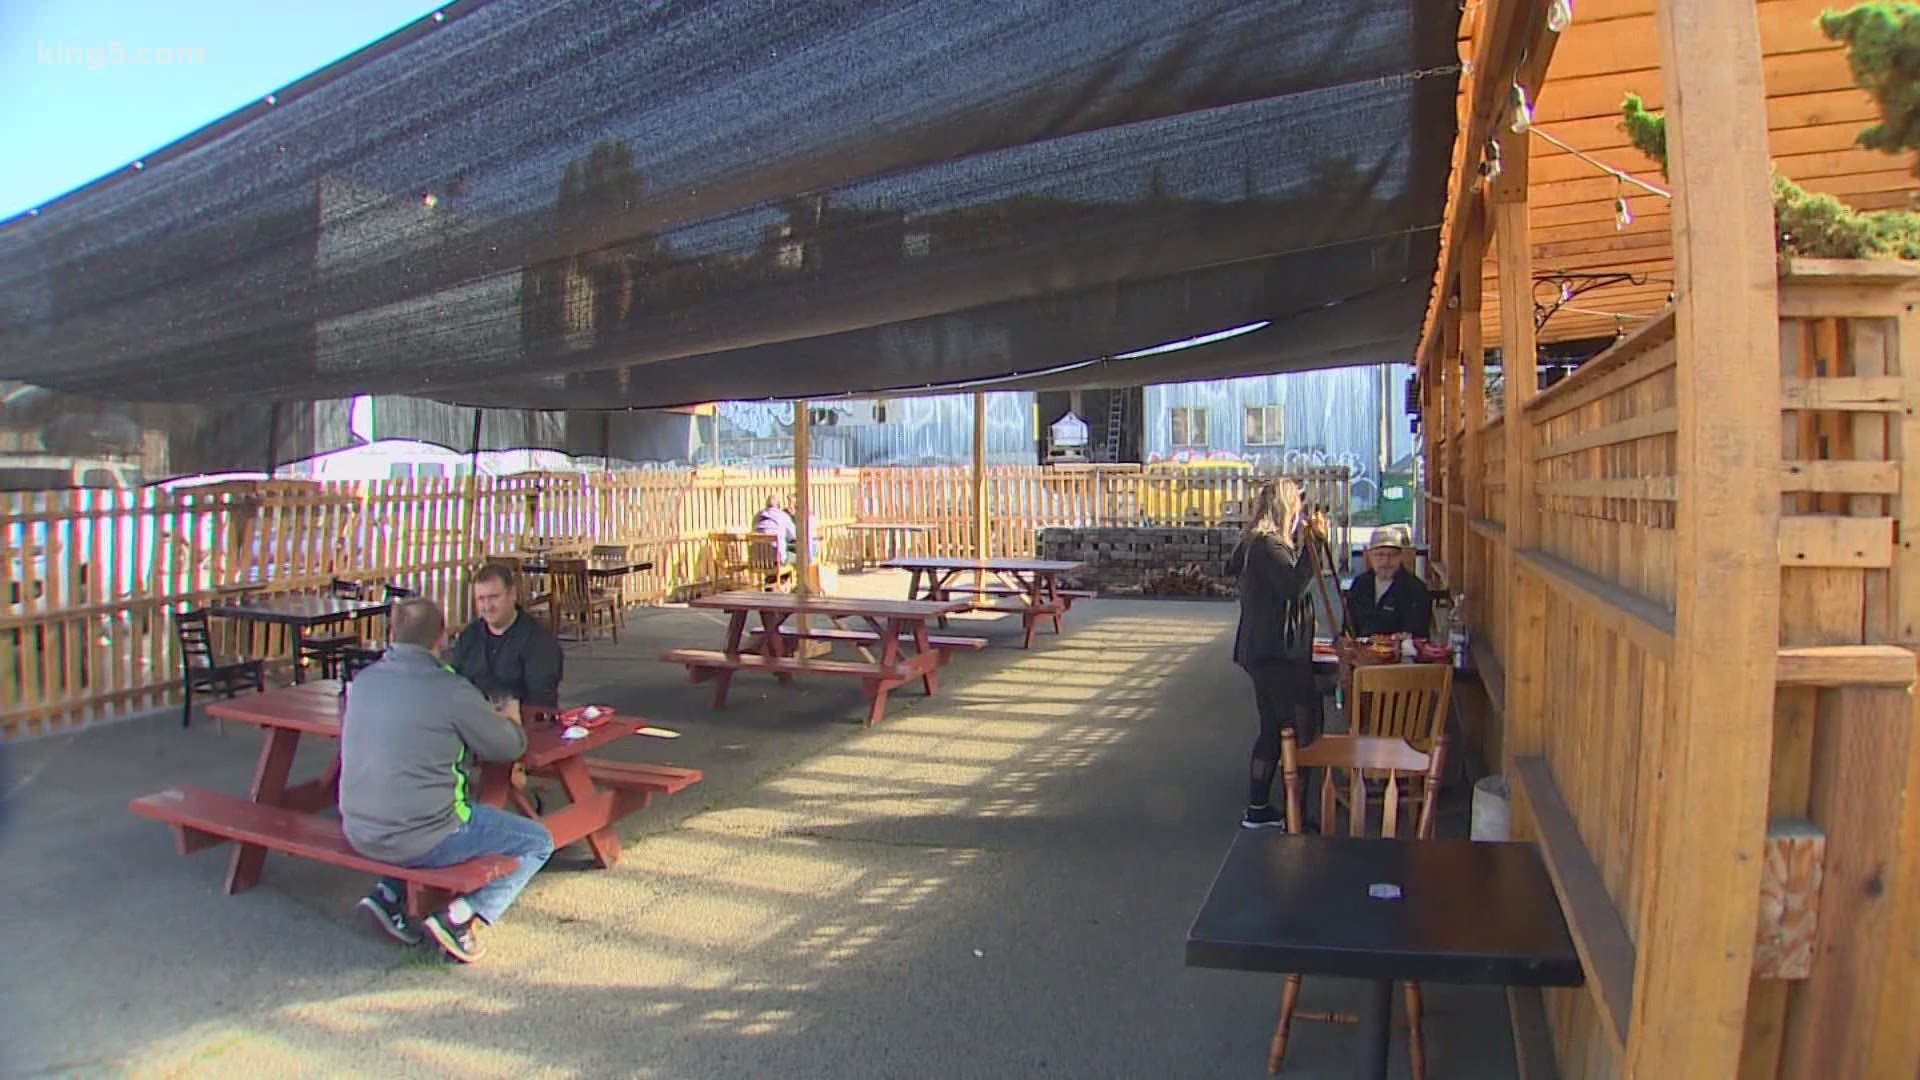 Seattle gives restaurants free permits for outdoor dining in cold